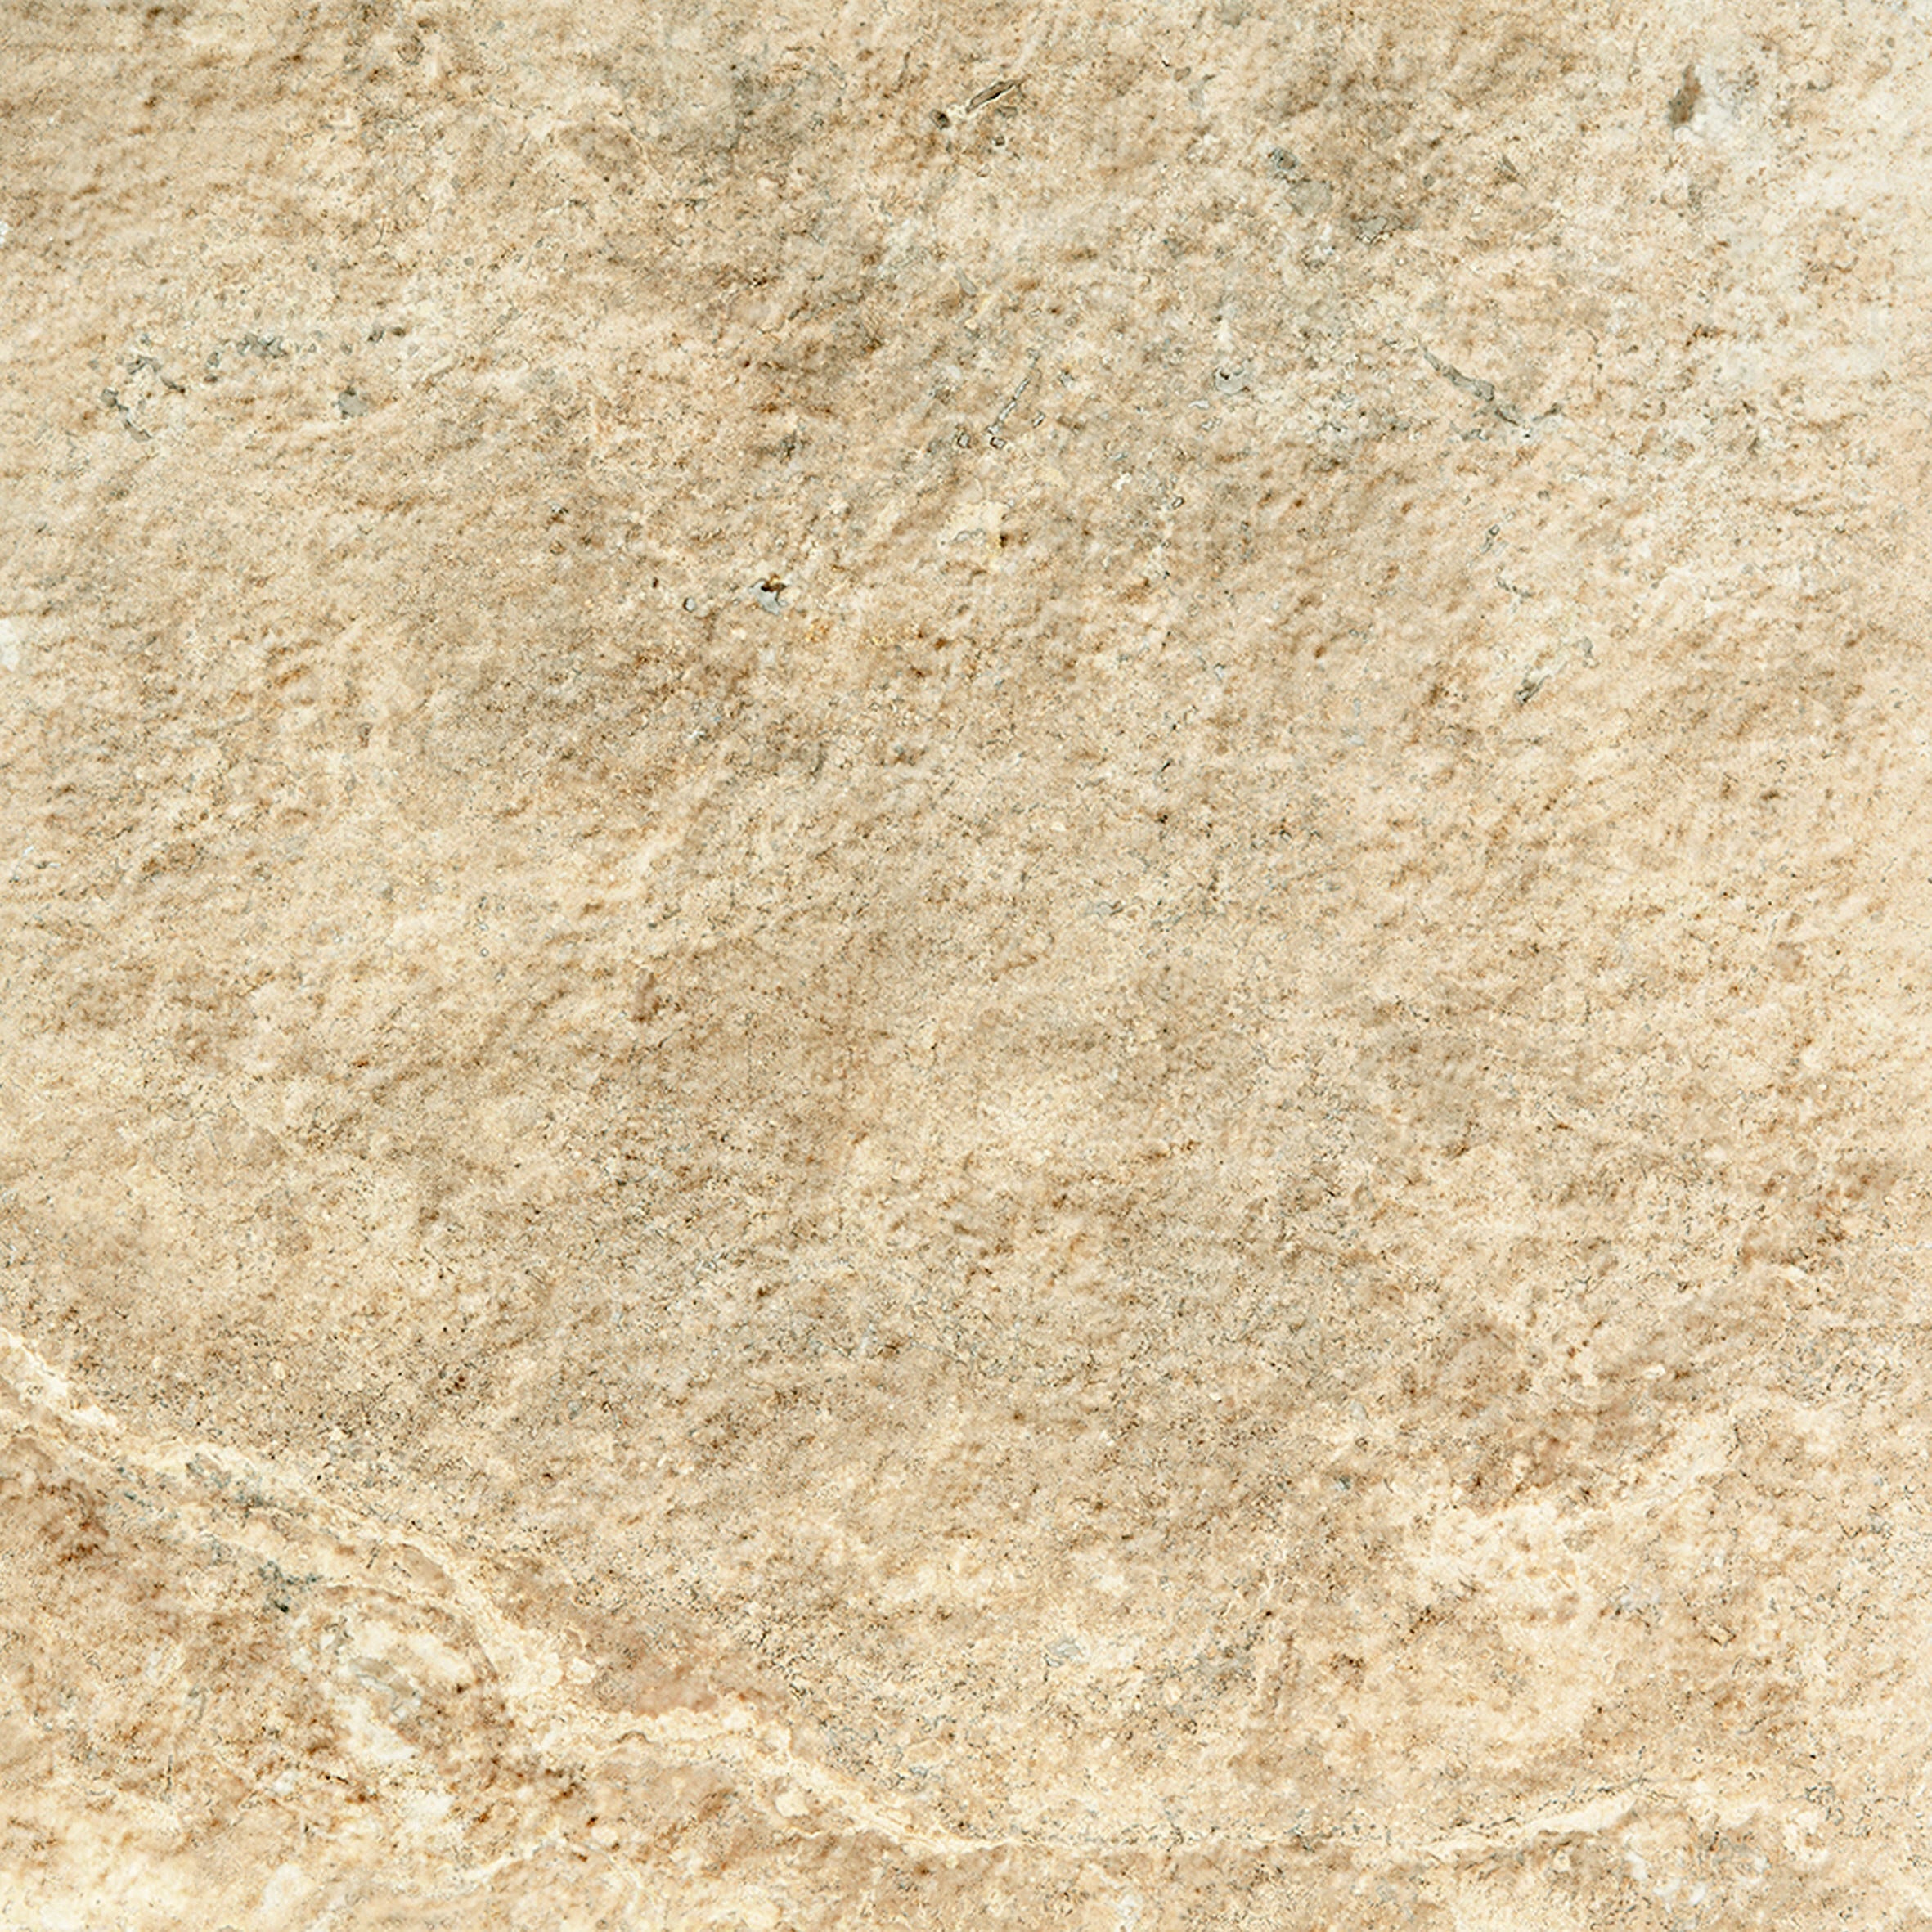 landmark frontier20 travertine cross cut cream paver tile 12x12x20mm matte rectified porcelain tile distributed by surface group international